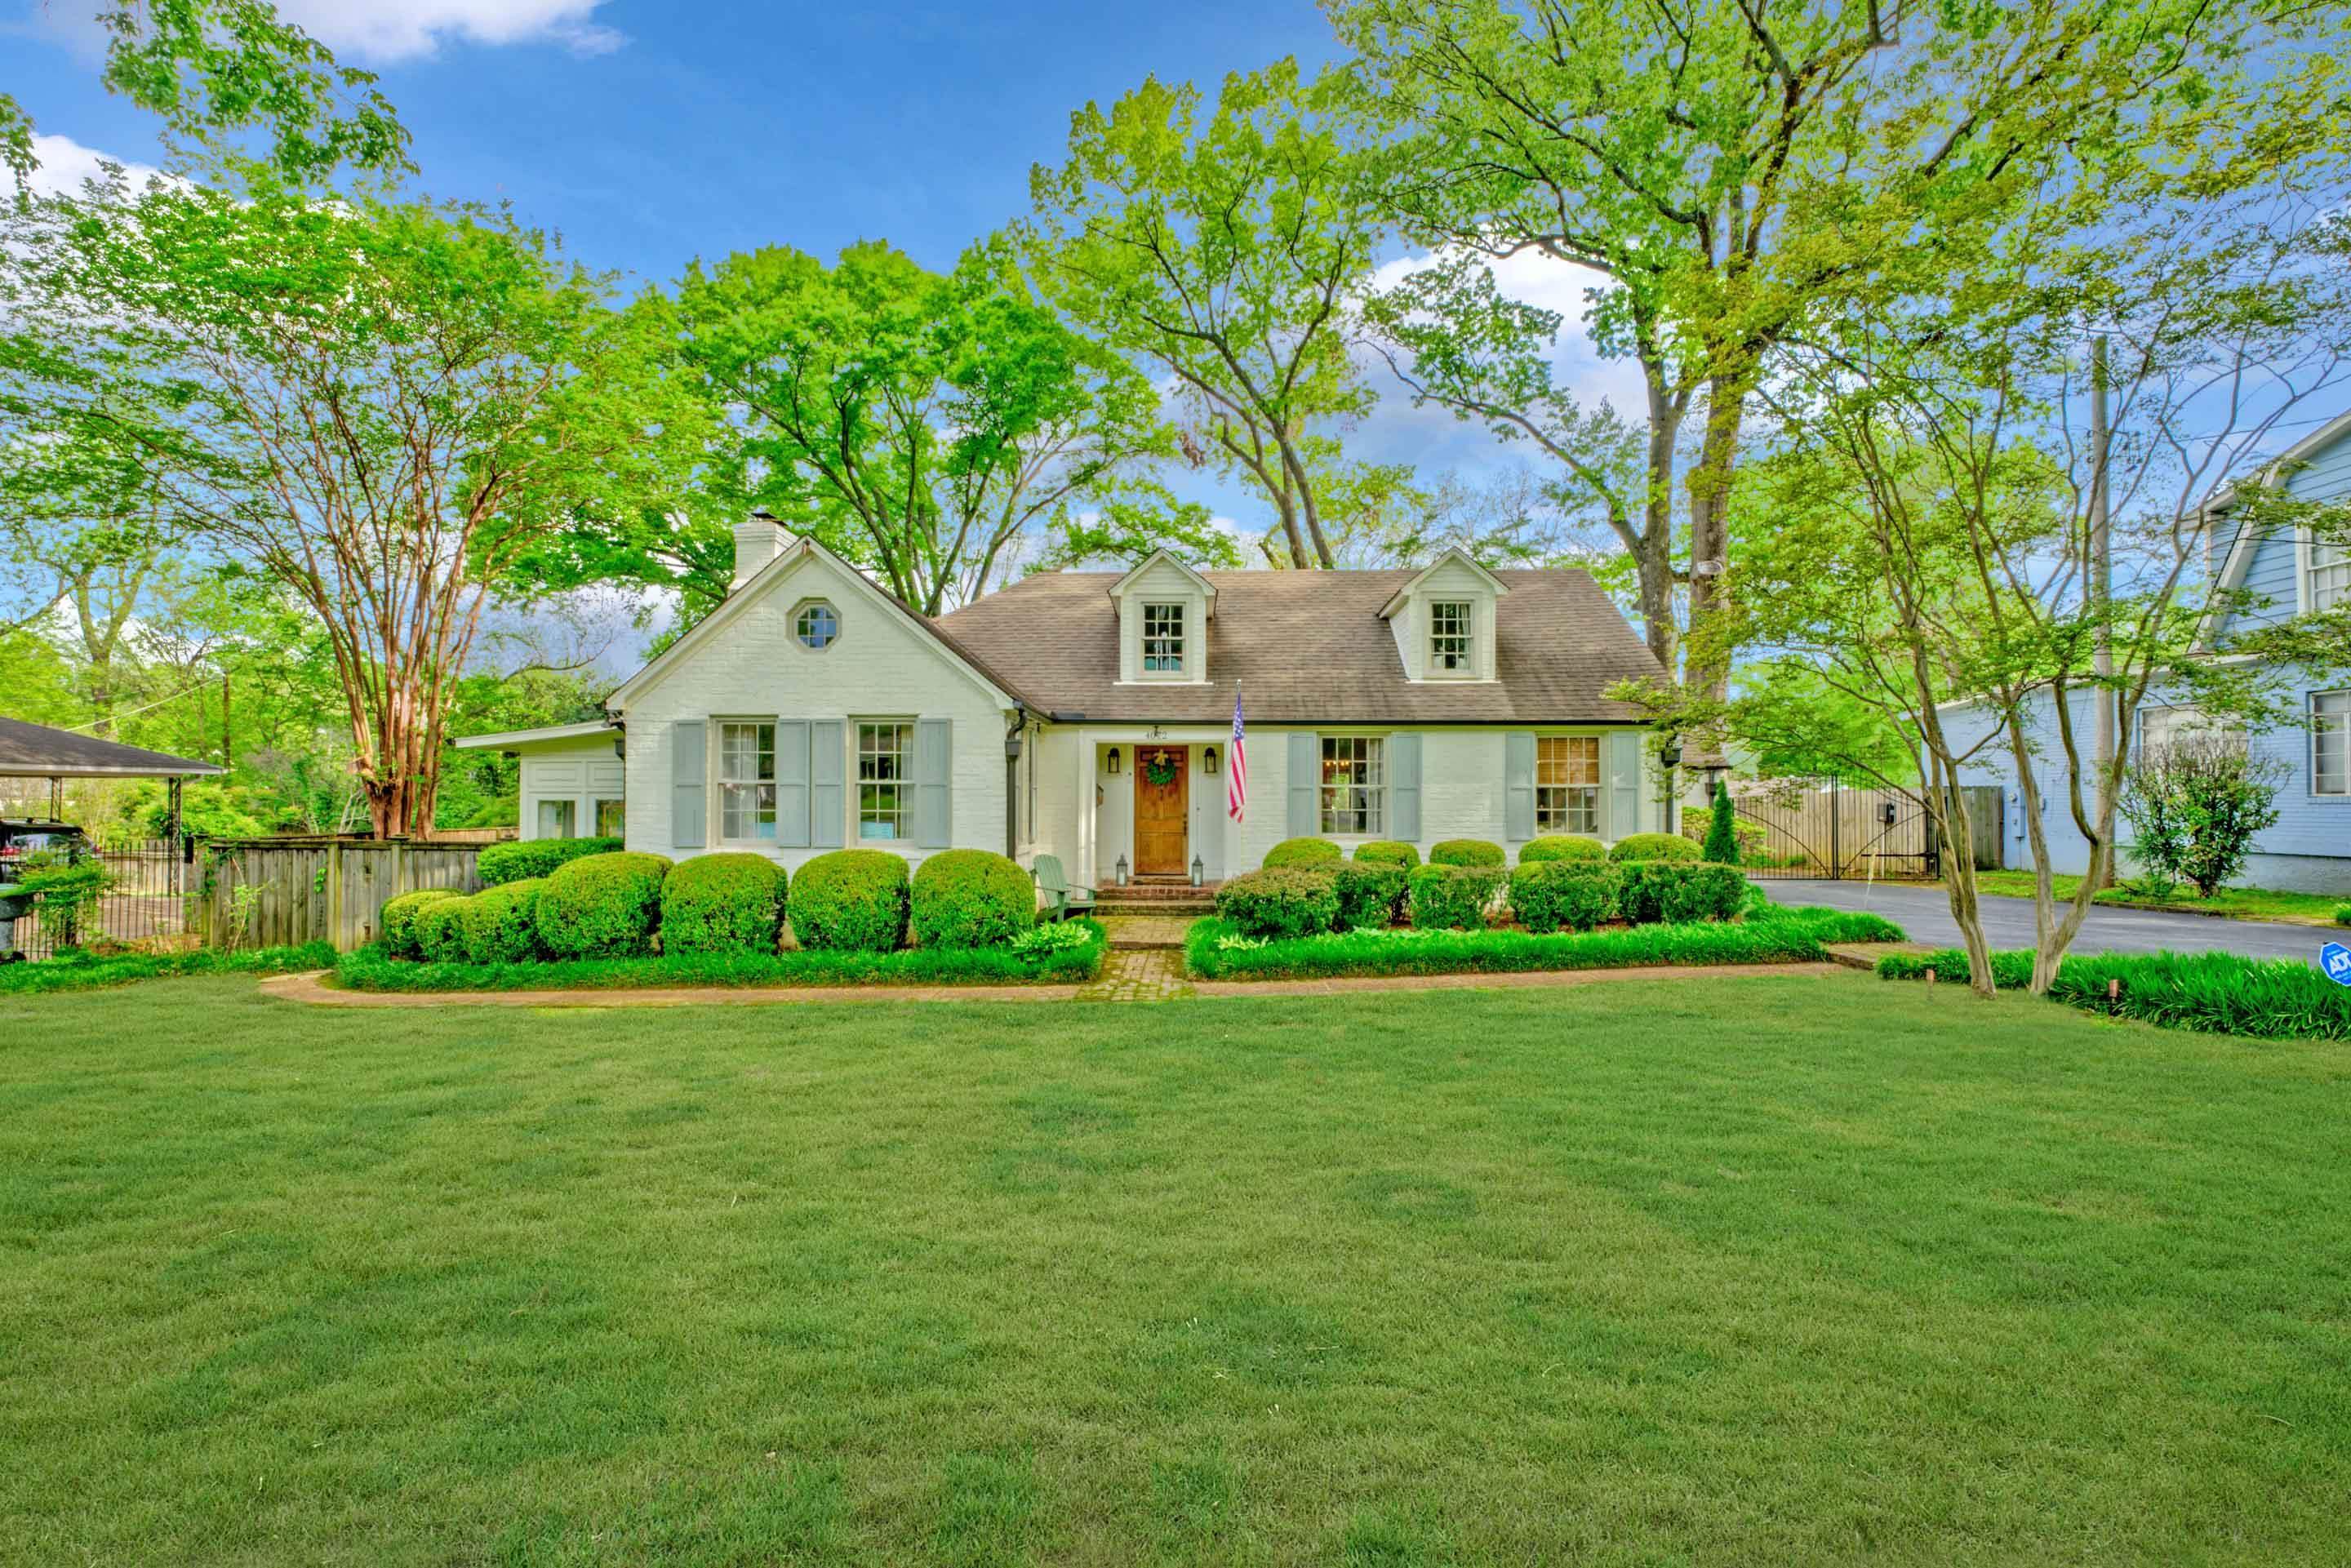 "Enchanted Retreat," a home you must see to believe. With smooth ceilings, hardwood floors, and beautiful landscaping, it's a dream come true. The backyard is an entertainer's delight with patios, a heated in-ground pool, a man cave, tree house & more!